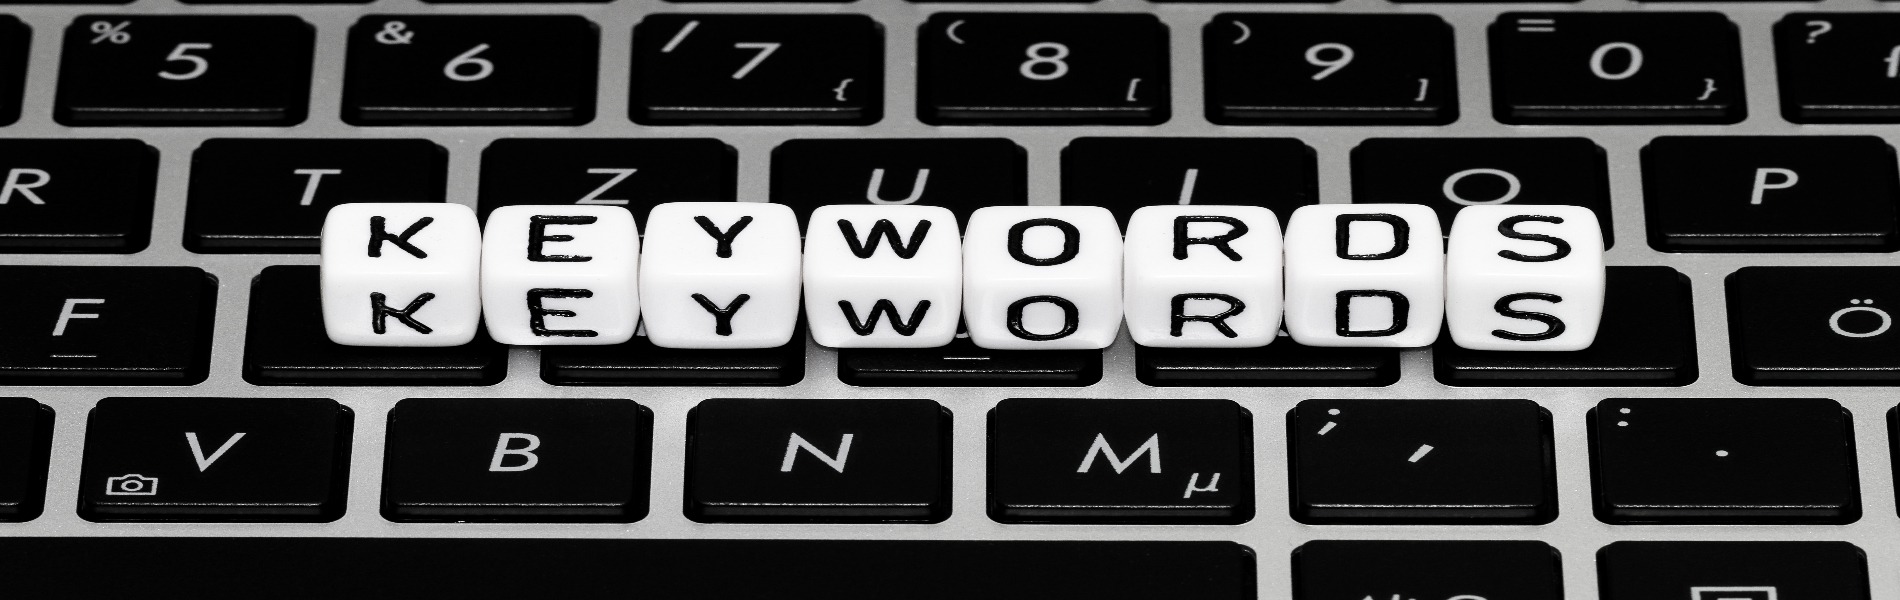 Successful communications start with keyword research